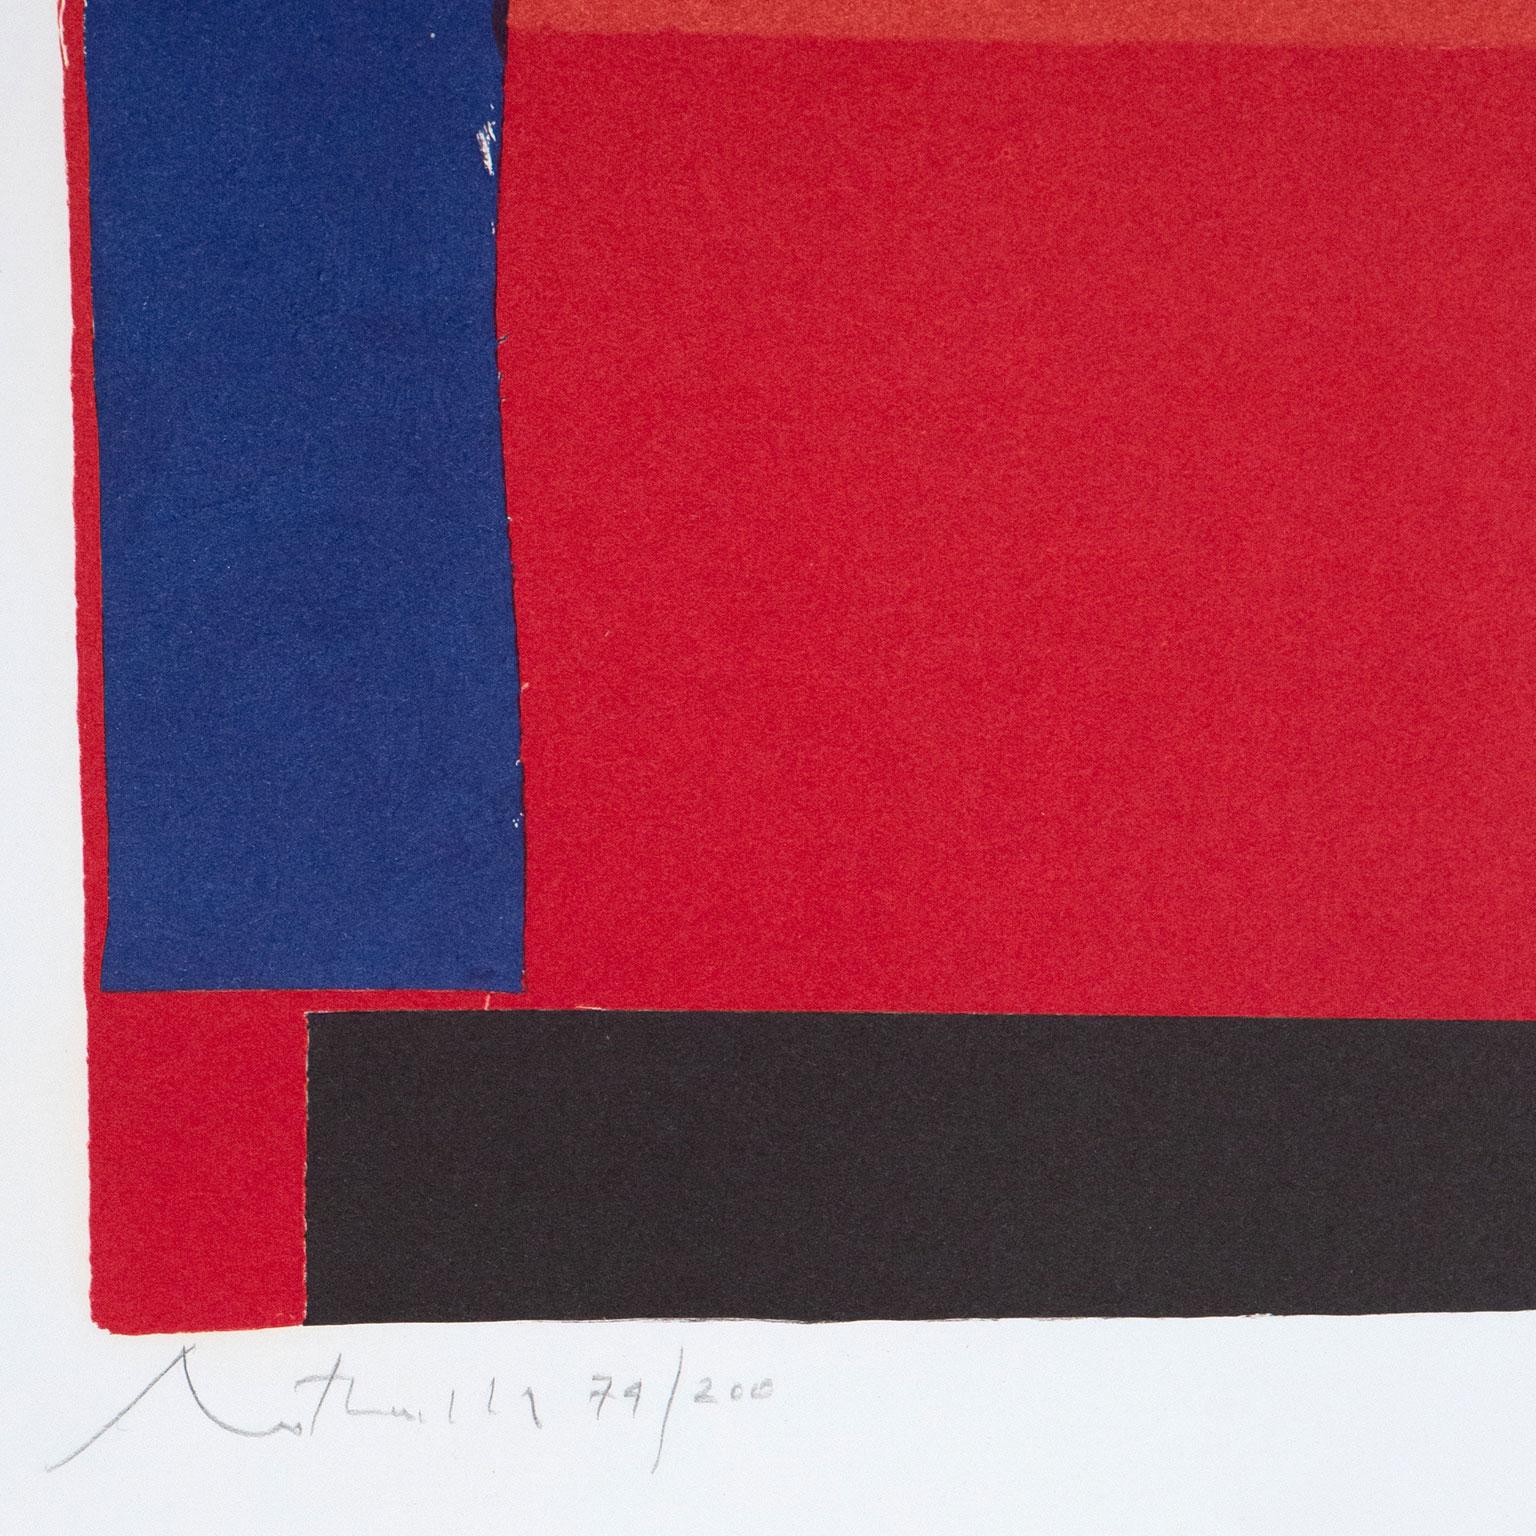 In Celebration - Print by Robert Motherwell